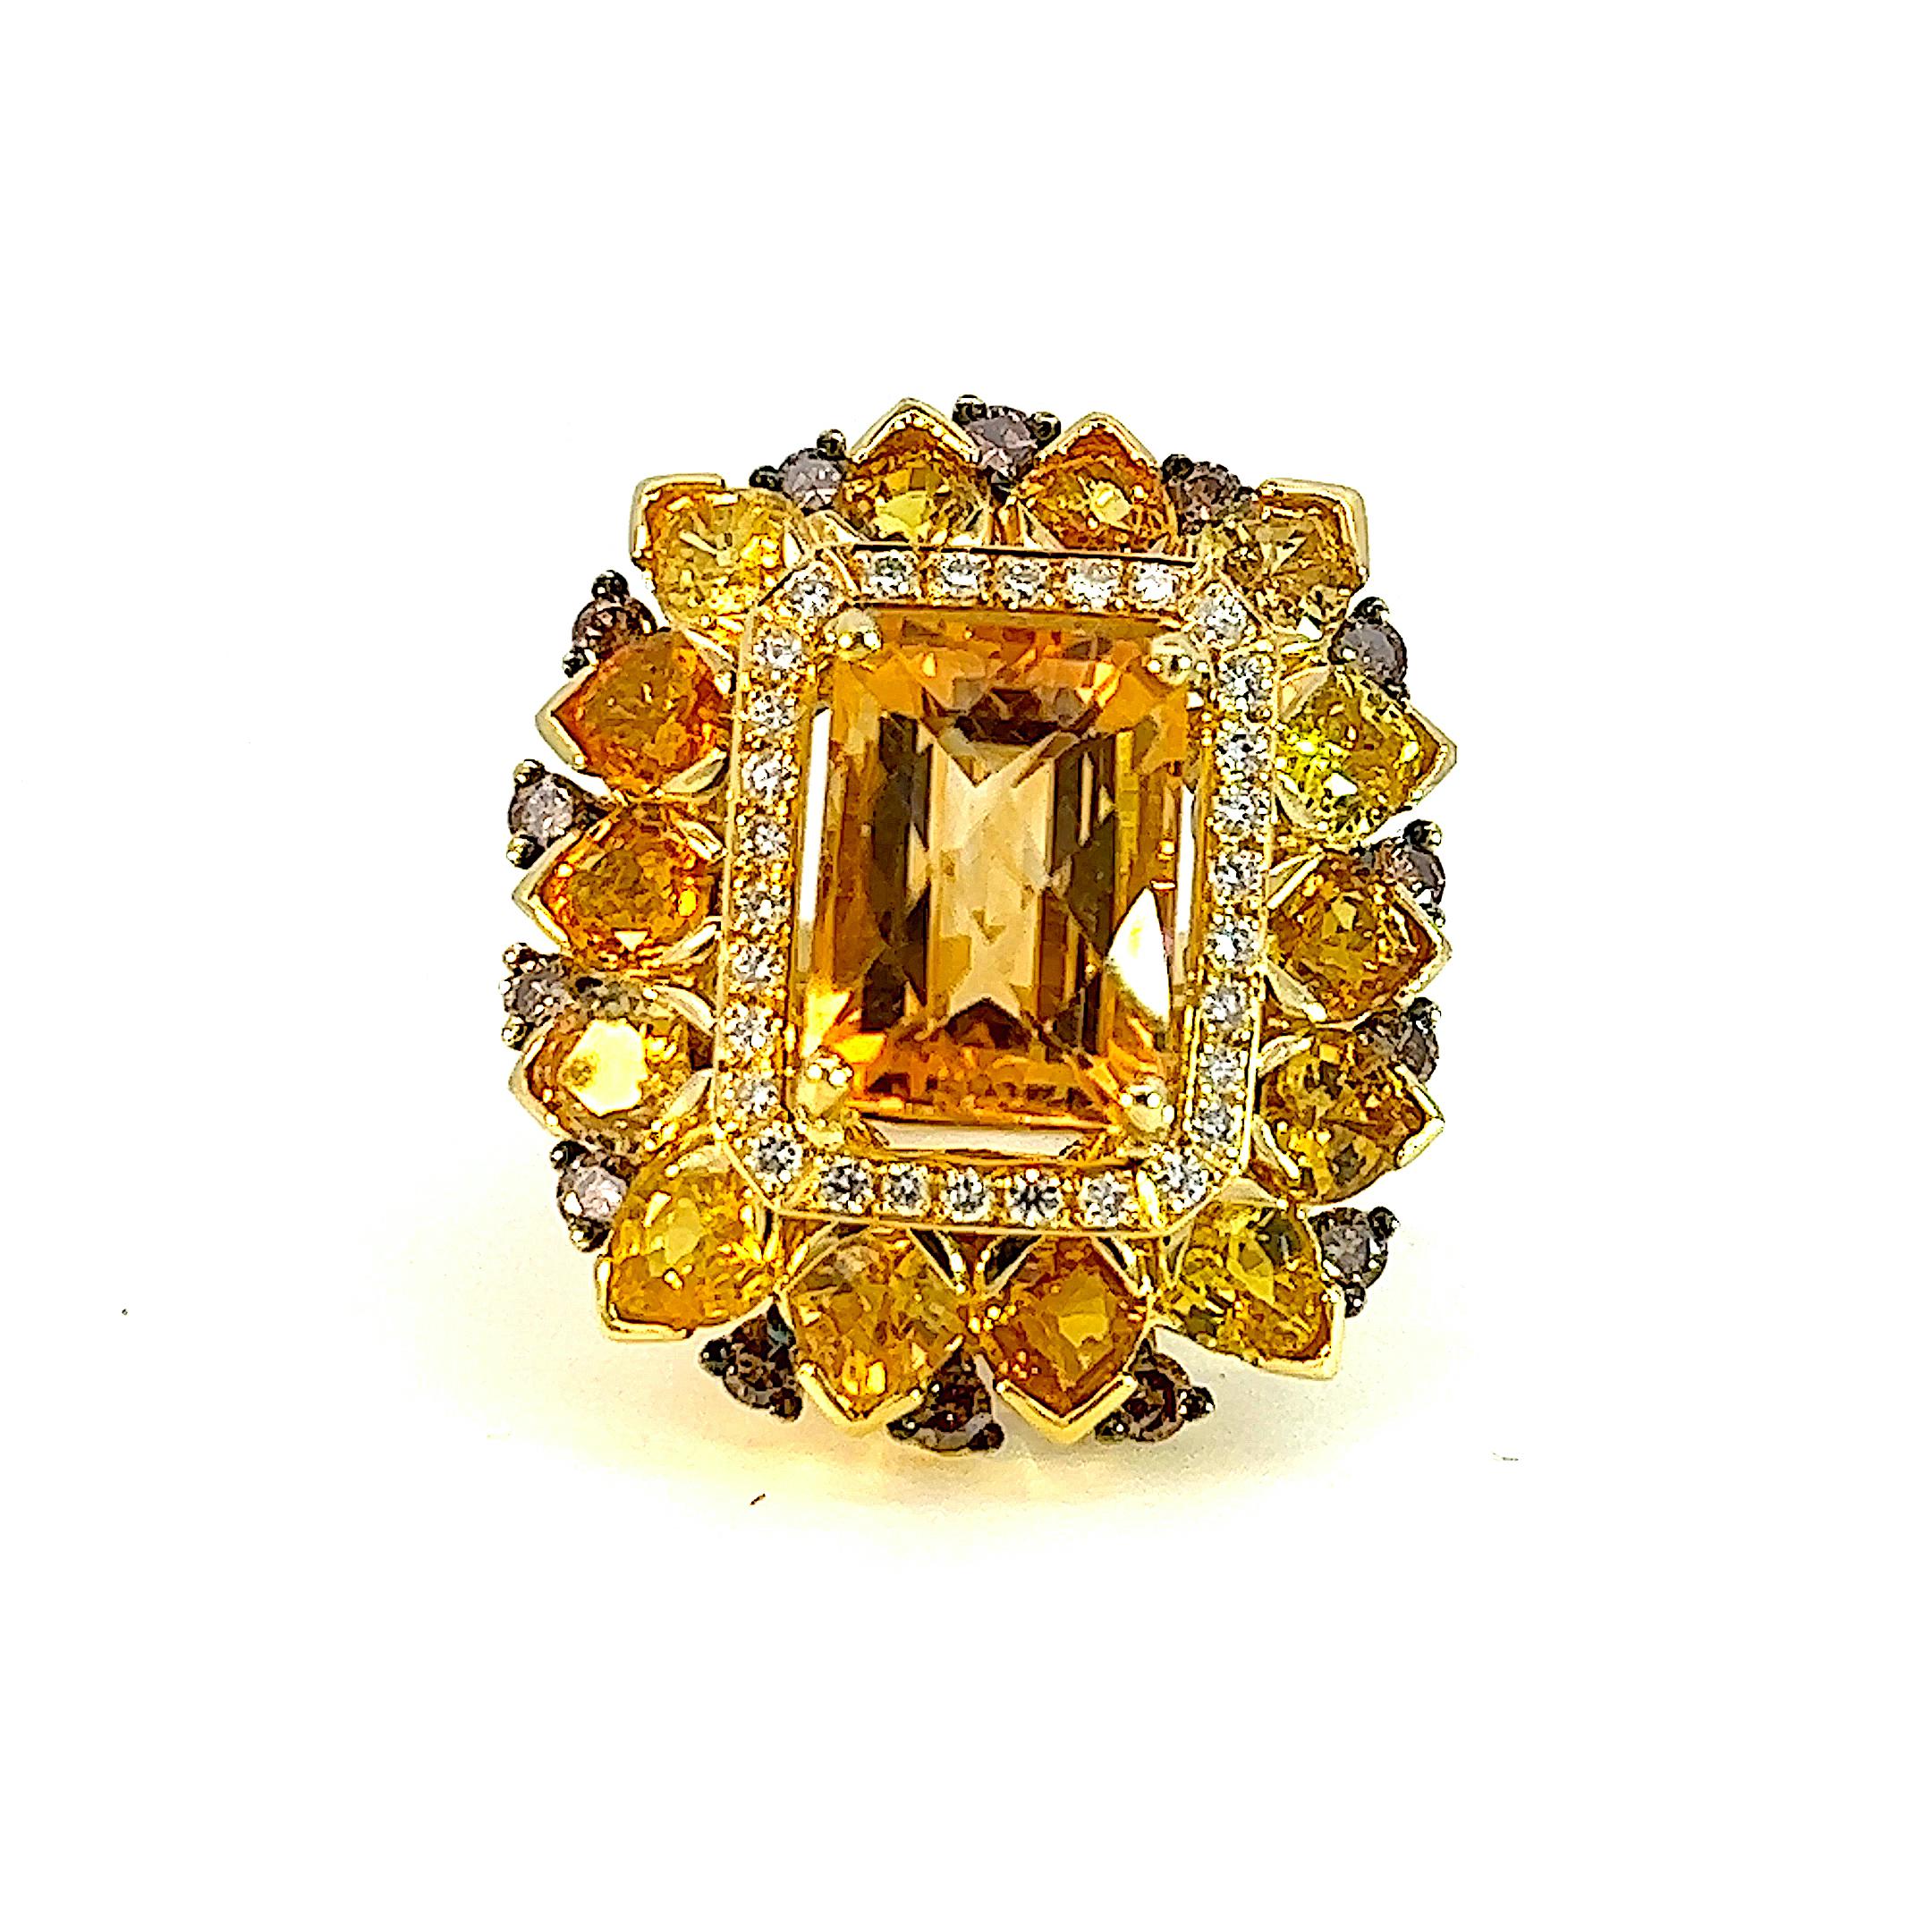 This sunshine stunning ring from S.Georgios designer was handmade in our workshop in Greece from solid 18 Karat Yellow Gold. The ring features 9.7 Carats of Faceted Citrine center surrounded by 10.1 Carats of pear-cut sapphires, a row of Brilliant